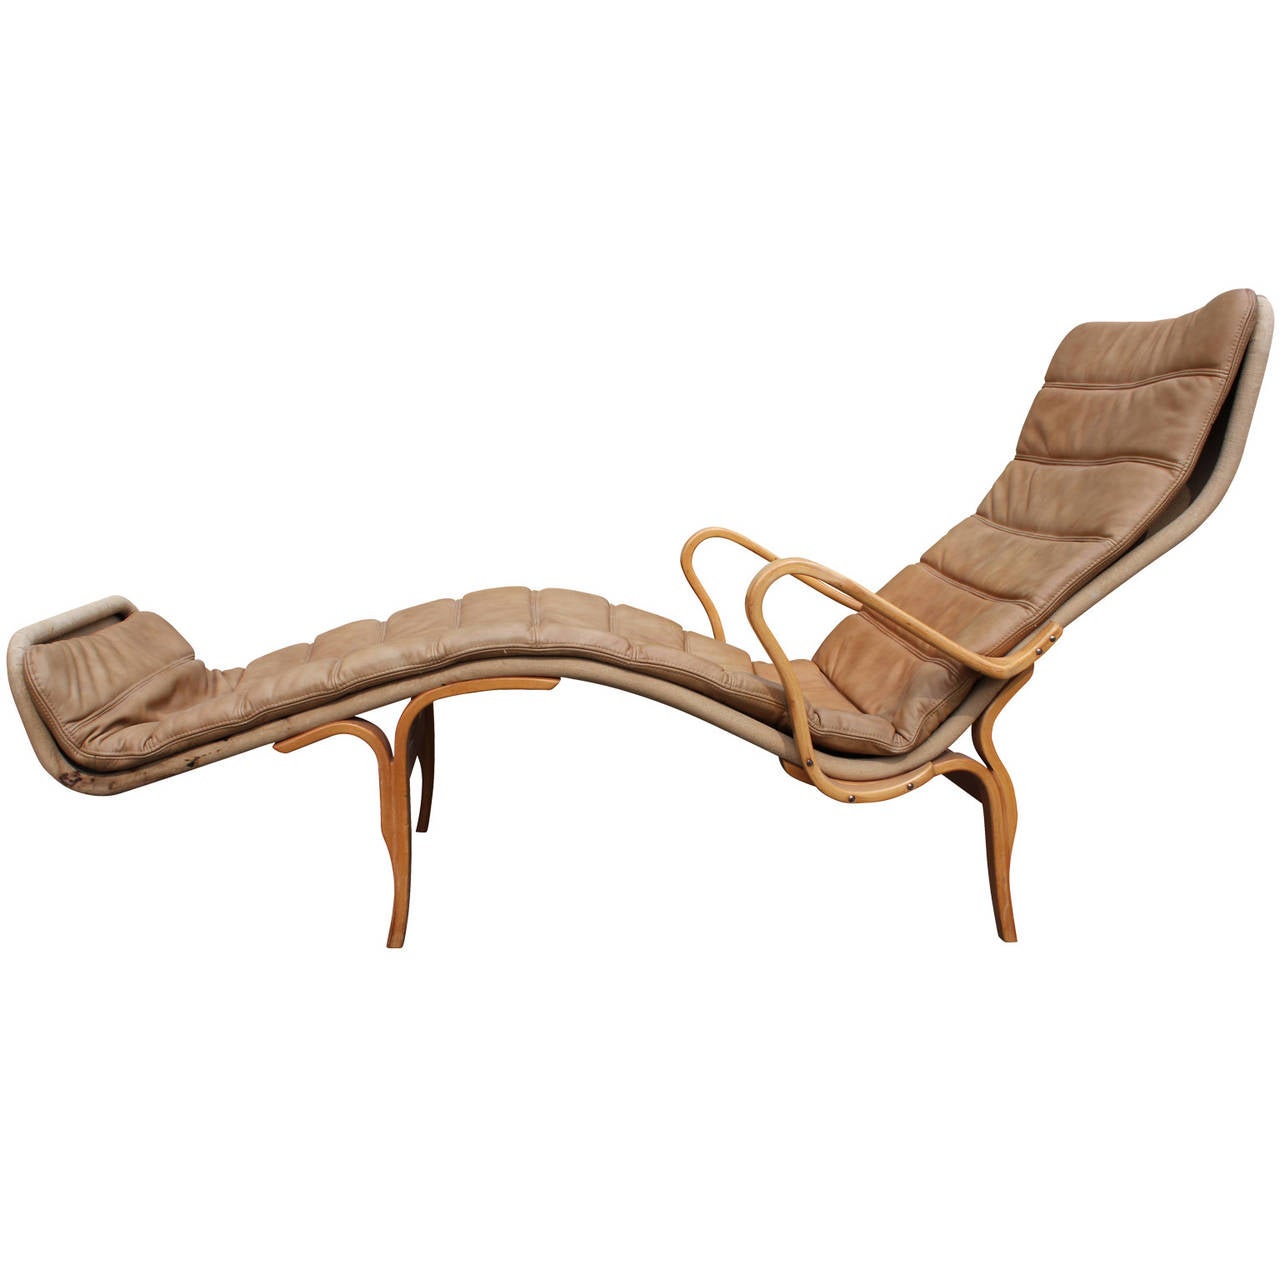 Sculptural chaise lounge by Bruno Mathsson for Dux. Chair is upholstered in original canvas with a neutral leather cushion. Frame is beautiful bentwood. Very comfortable and a fantastic statement piece. There is some slight discoloration of the